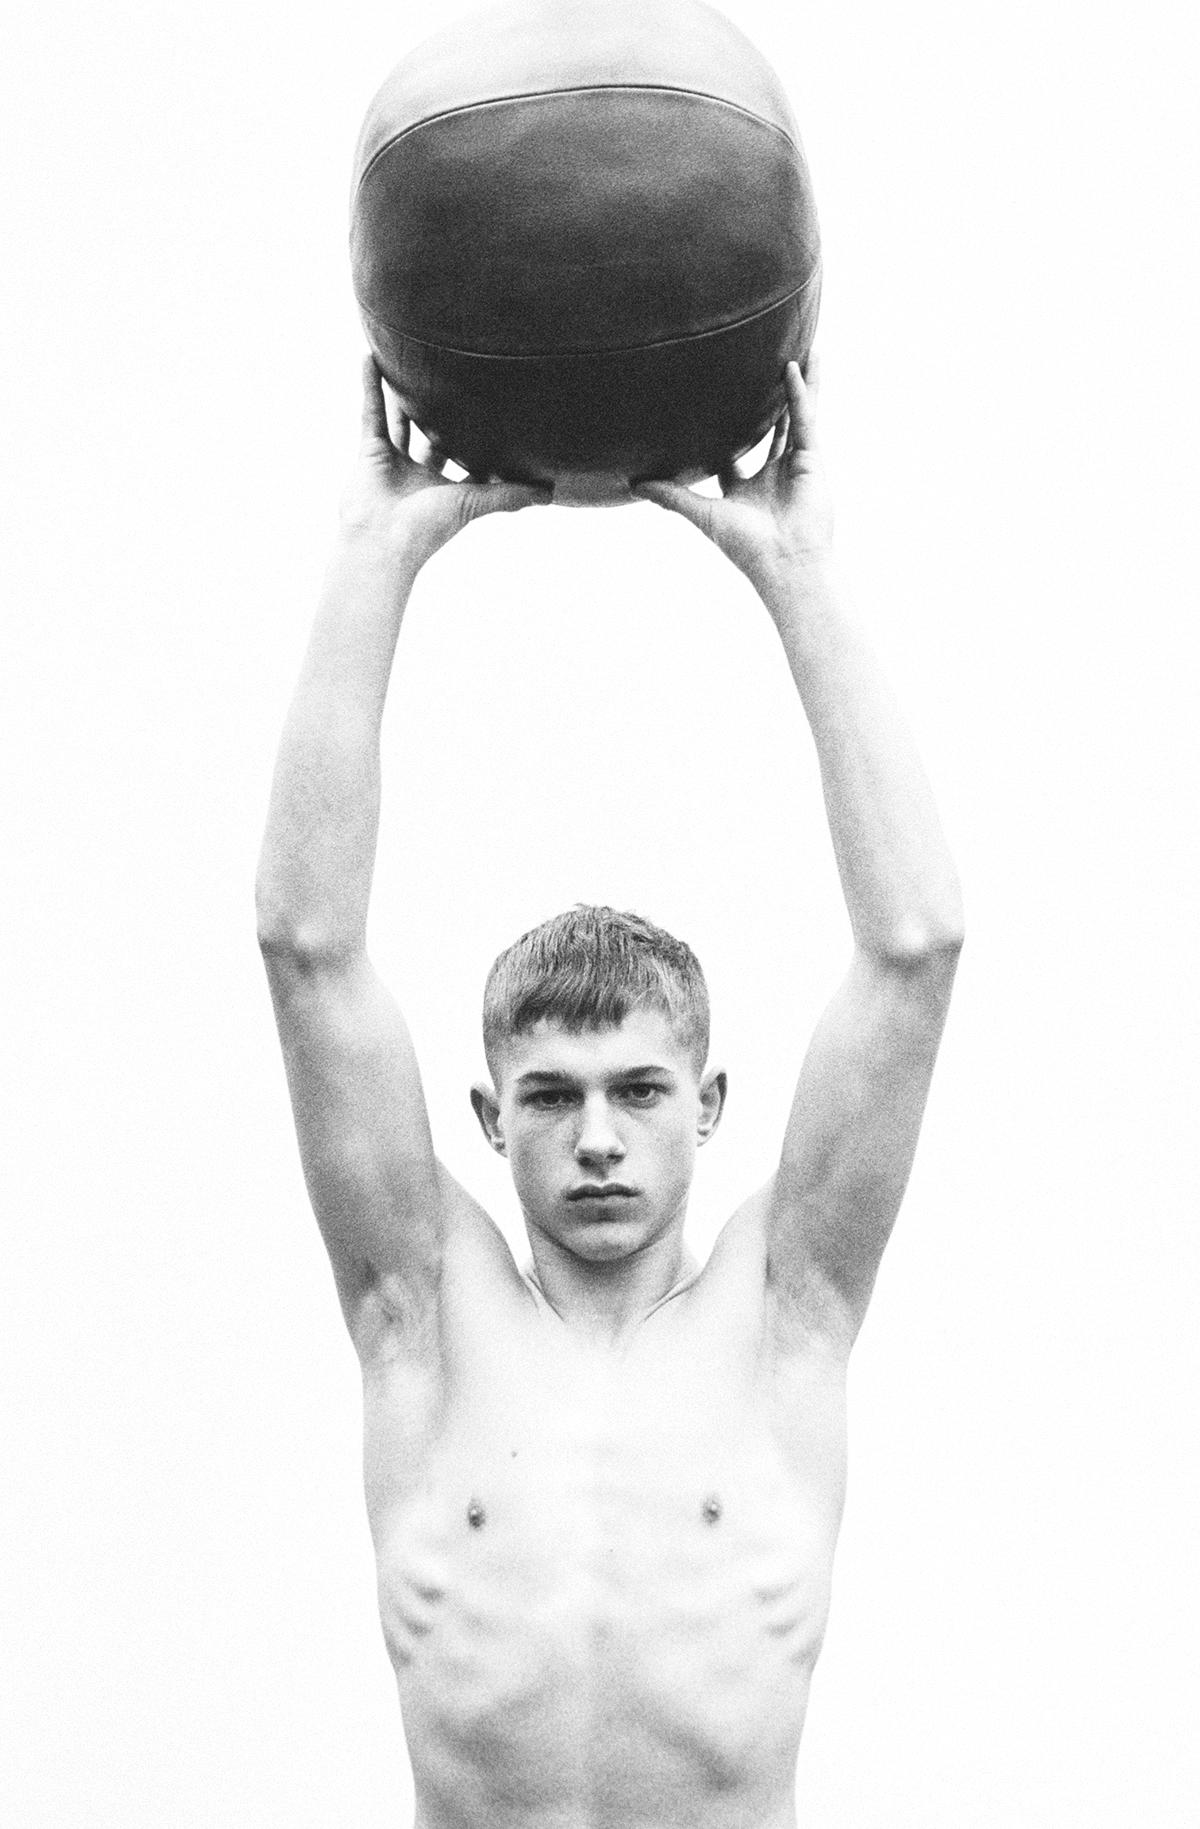 Luke Smalley Black and White Photograph - Medicine Ball Front